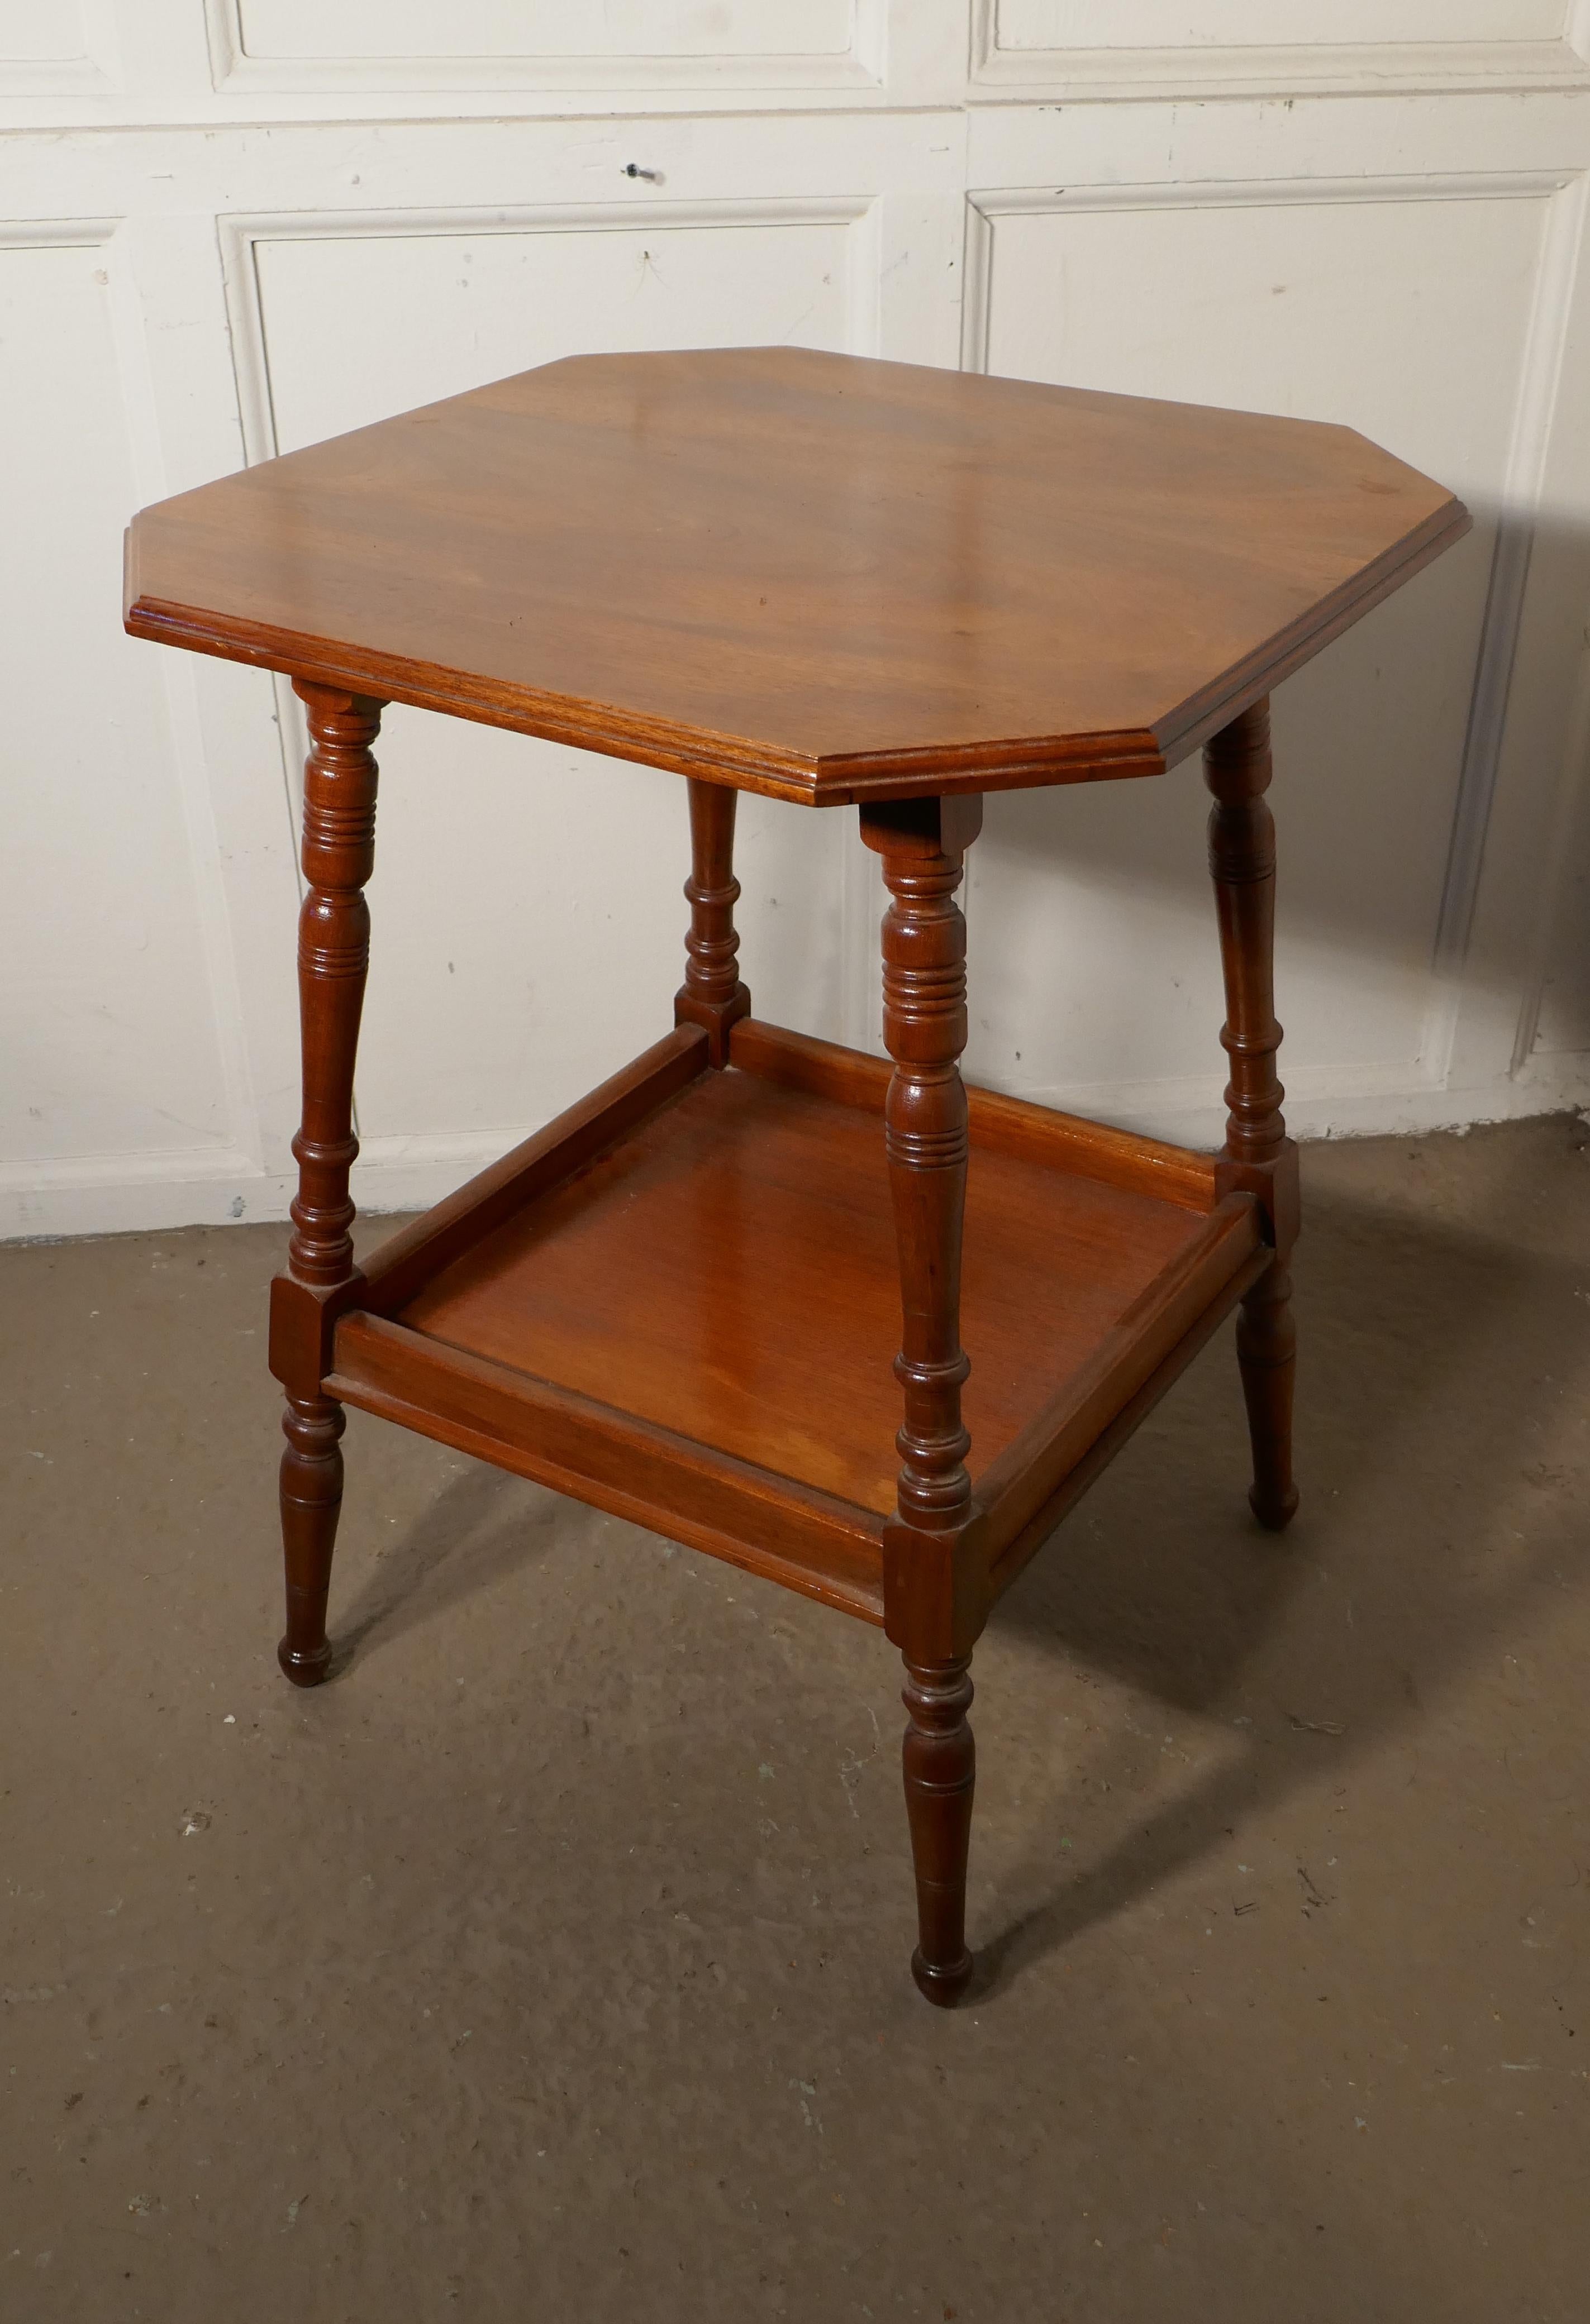 Edwardian Blonde Mahogany Étagère or Occasional Table 1